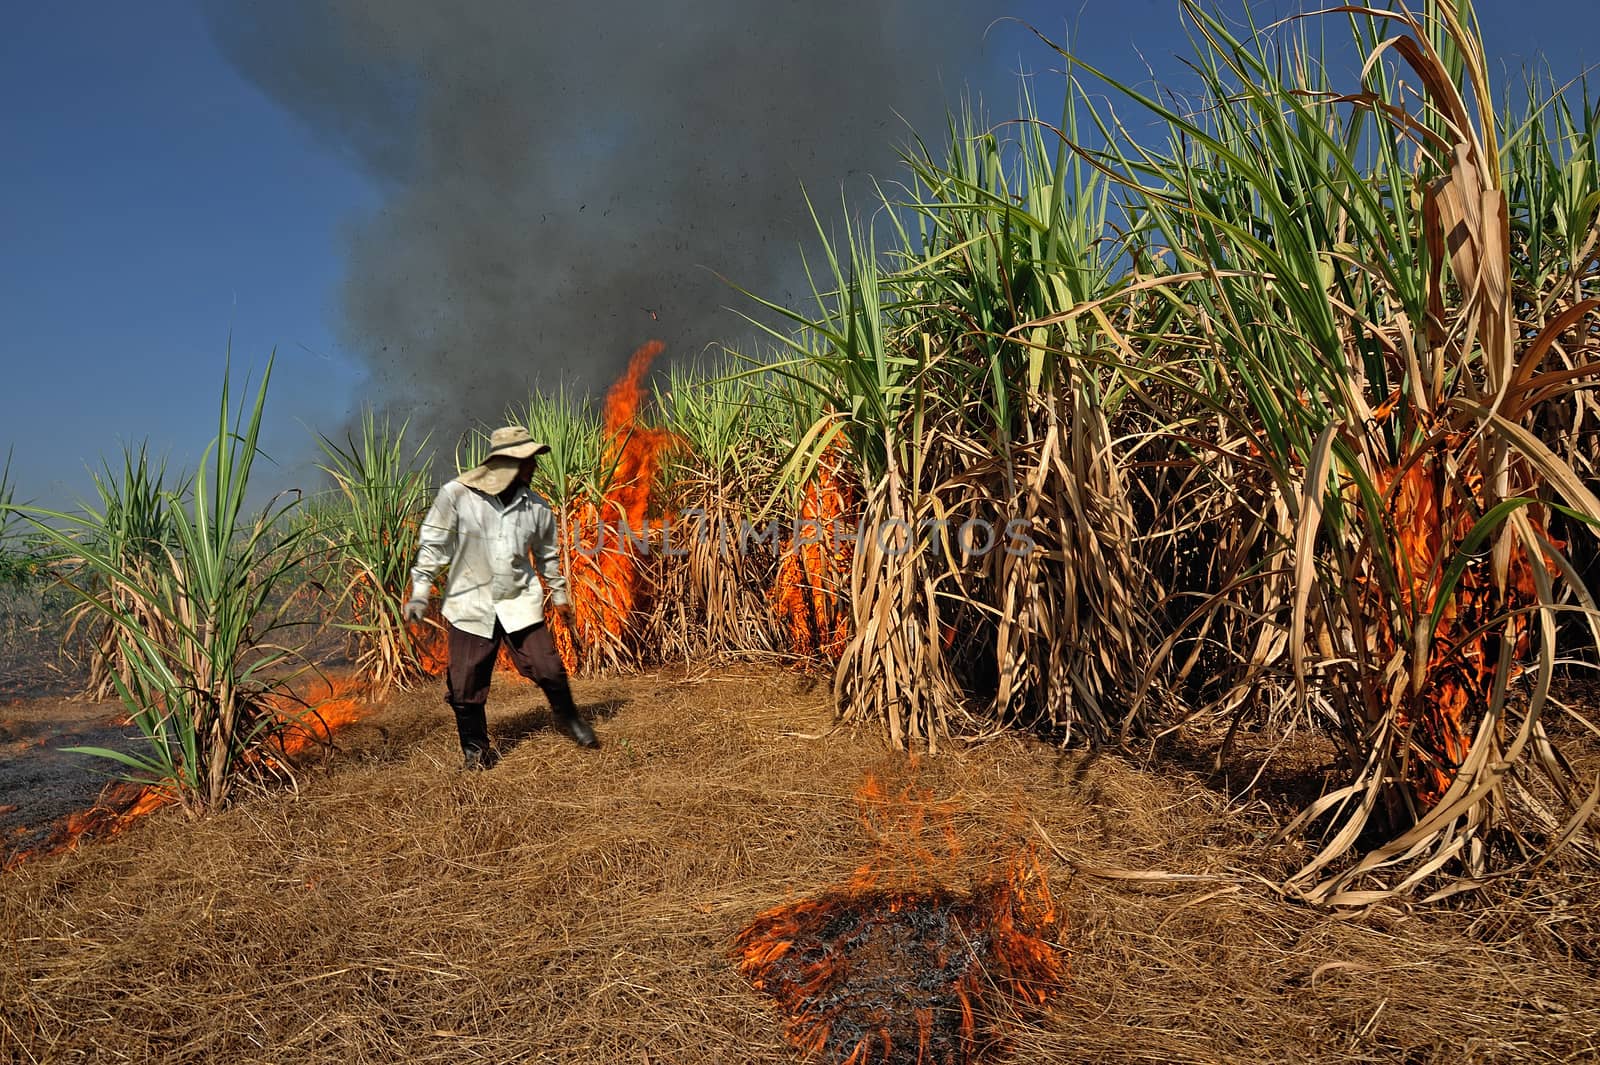 Sugarcane field burning in Thailand by think4photop